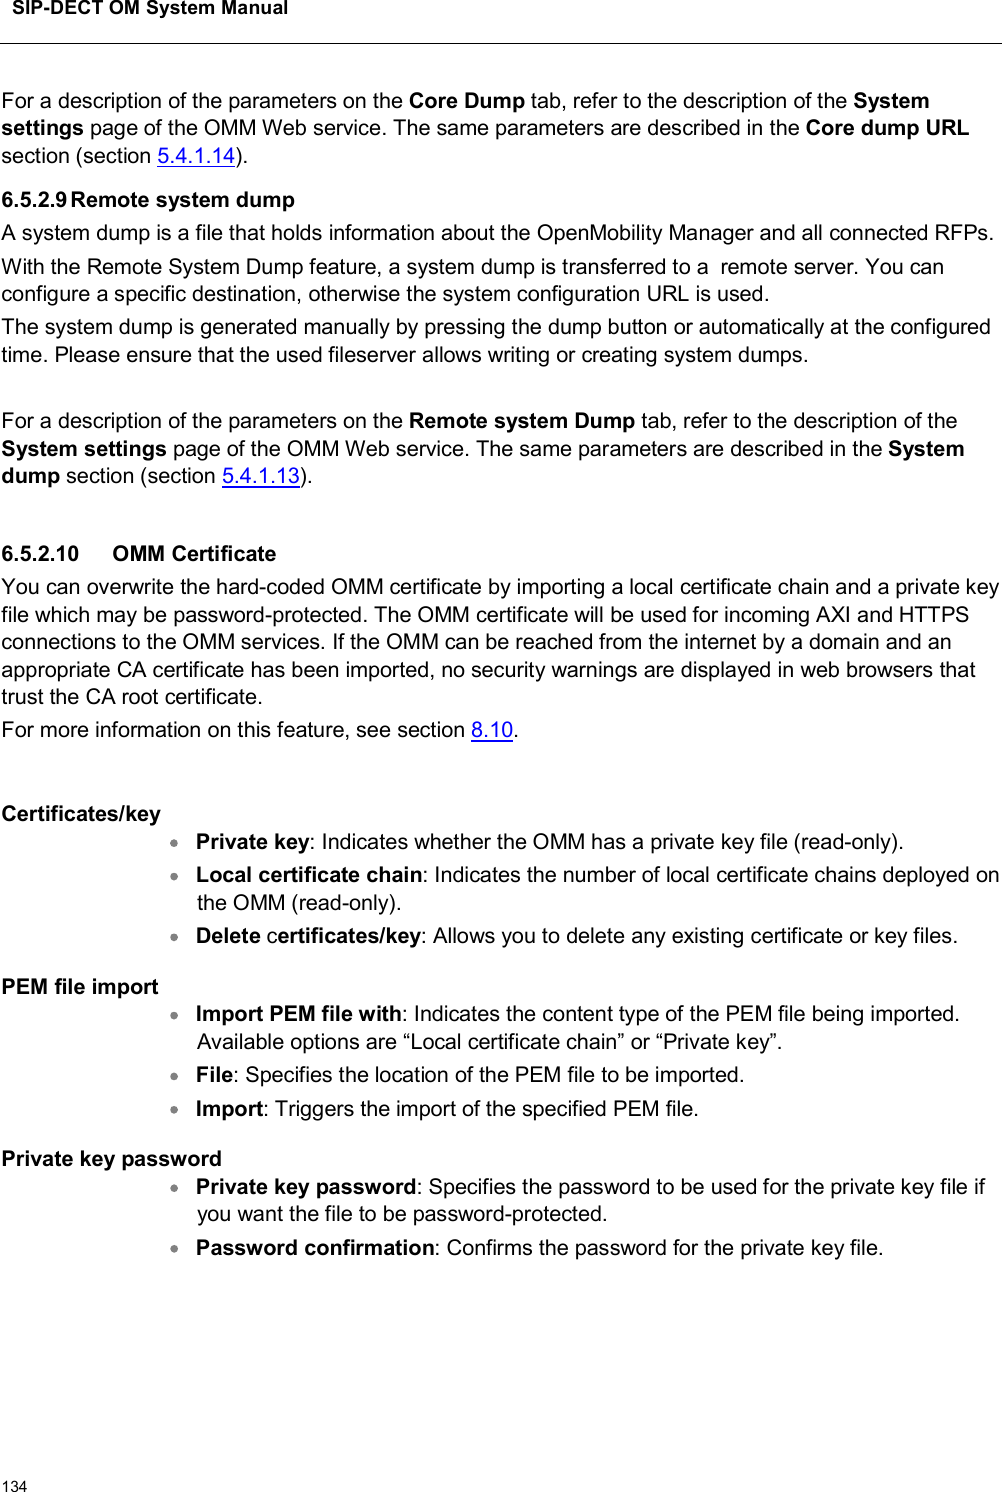 SIP-DECT OM System Manual134For a description of the parameters on the Core Dump tab, refer to the description of the System settings page of the OMM Web service. The same parameters are described in the Core dump URLsection (section 5.4.1.14).6.5.2.9Remote system dumpA system dump is a file that holds information about the OpenMobility Manager and all connected RFPs. With the Remote System Dump feature, a system dump is transferred to a  remote server. You can configure a specific destination, otherwise the system configuration URL is used.The system dump is generated manually by pressing the dump button or automatically at the configured time. Please ensure that the used fileserver allows writing or creating system dumps.For a description of the parameters on the Remote system Dump tab, refer to the description of the System settings page of the OMM Web service. The same parameters are described in the System dump section (section 5.4.1.13).6.5.2.10 OMM CertificateYou can overwrite the hard-coded OMM certificate by importing a local certificate chain and a private key file which may be password-protected. The OMM certificate will be used for incoming AXI and HTTPS connections to the OMM services. If the OMM can be reached from the internet by a domain and an appropriate CA certificate has been imported, no security warnings are displayed in web browsers that trust the CA root certificate.For more information on this feature, see section 8.10.Certificates/keyPrivate key: Indicates whether the OMM has a private key file (read-only).Local certificate chain: Indicates the number of local certificate chains deployed on the OMM (read-only).Delete certificates/key: Allows you to delete any existing certificate or key files.PEM file importImport PEM file with: Indicates the content type of the PEM file being imported. Available options are “Local certificate chain” or “Private key”.File: Specifies the location of the PEM file to be imported. Import: Triggers the import of the specified PEM file.Private key password Private key password: Specifies the password to be used for the private key file if you want the file to be password-protected. Password confirmation: Confirms the password for the private key file.